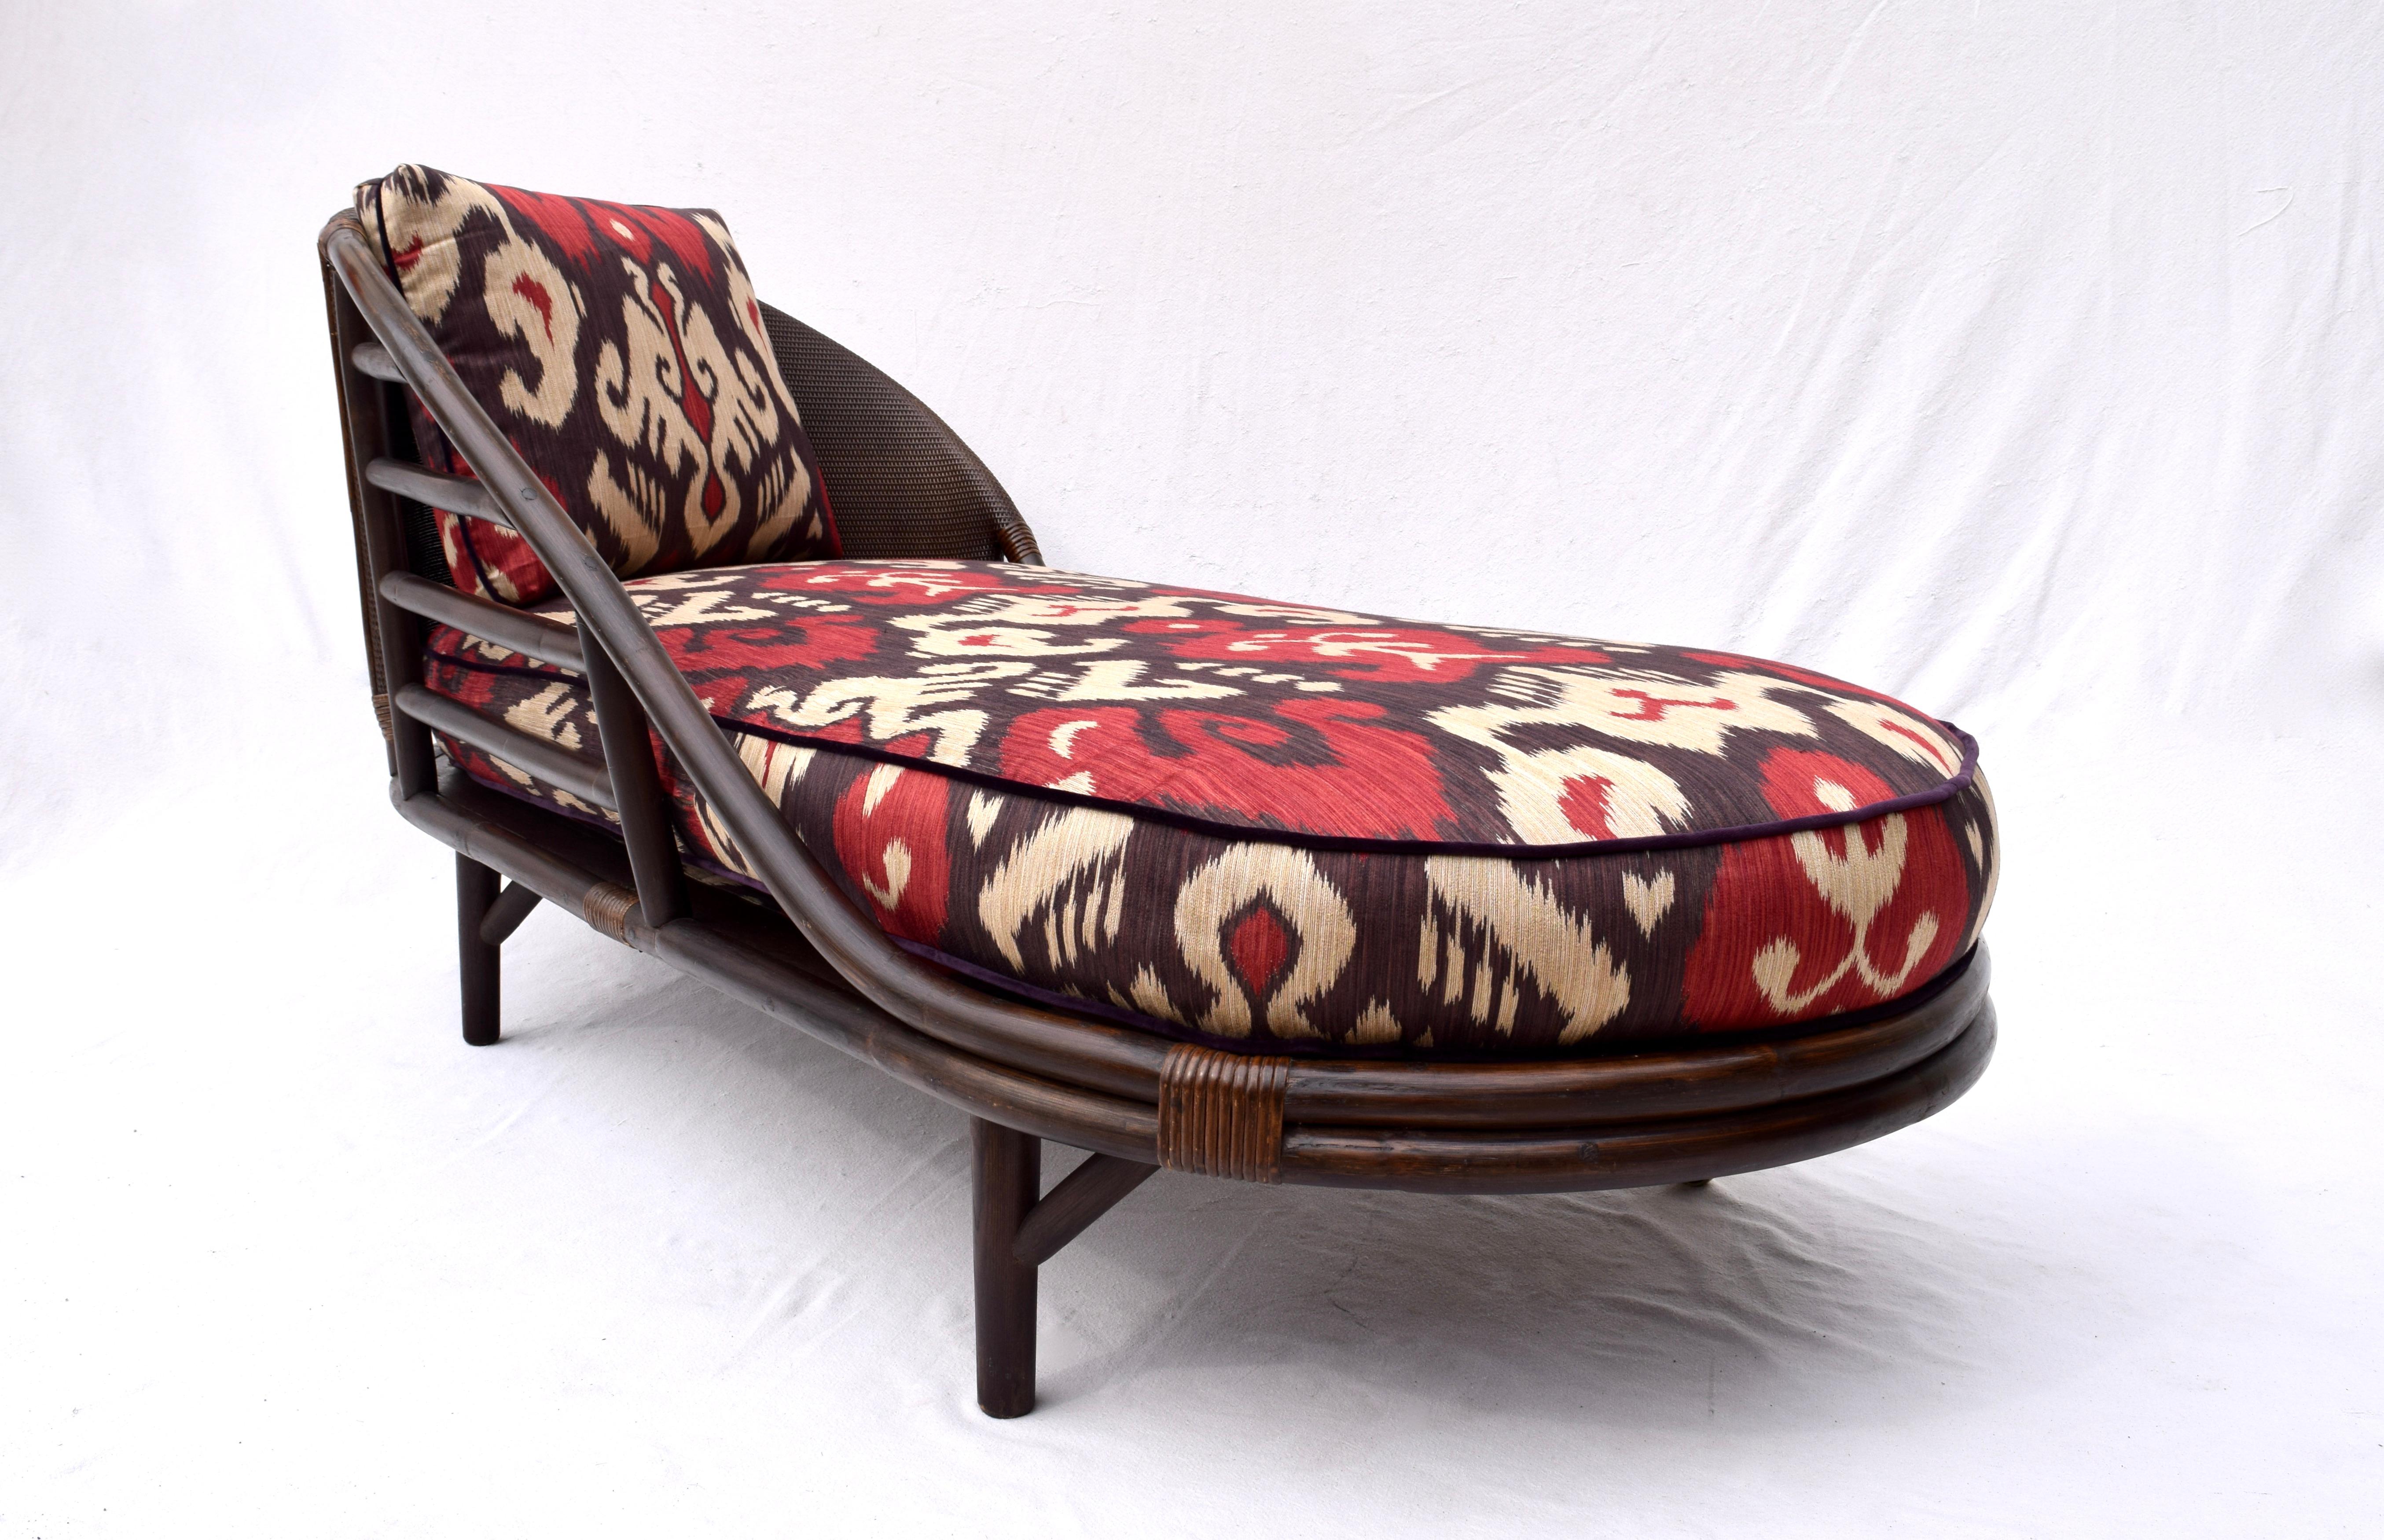 Chinoiserie Rattan Grasscloth Chaise Lounge in Ikat 4